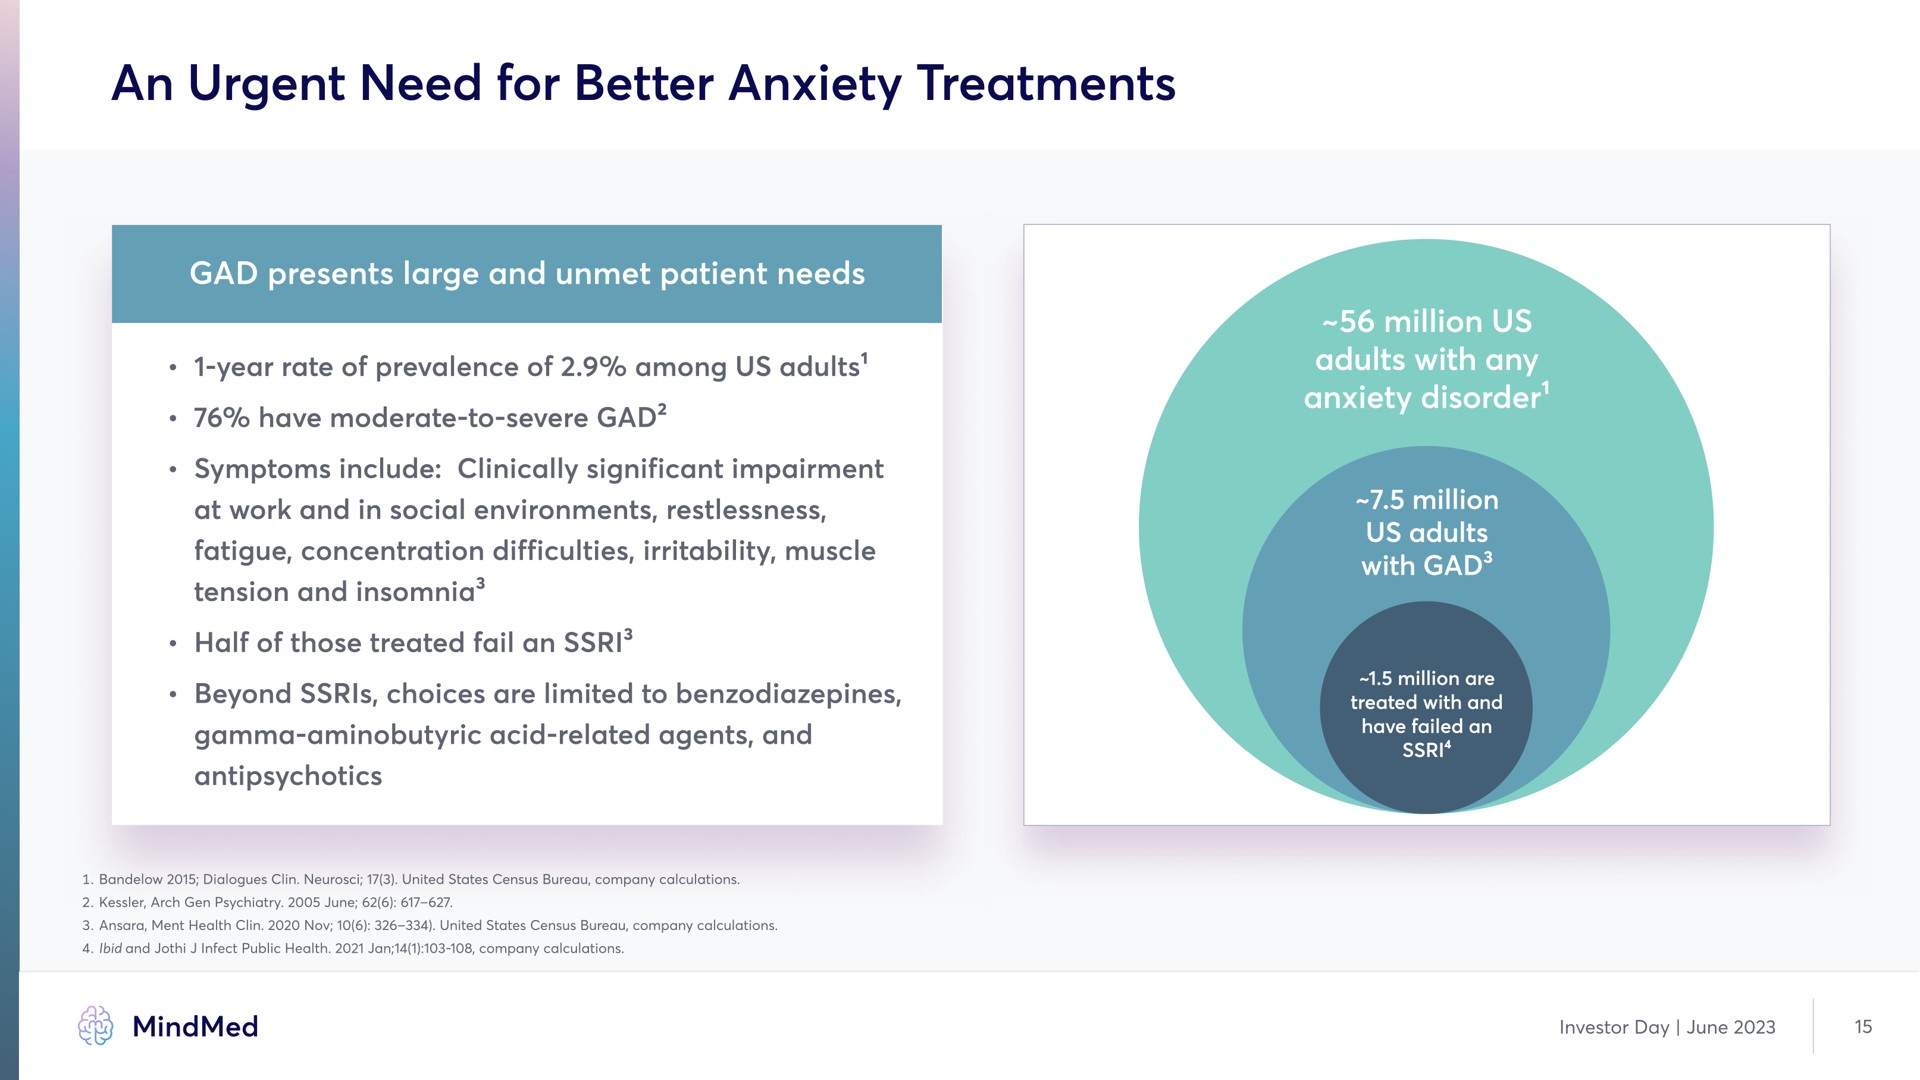 an urgent need for better anxiety treatments | MindMed